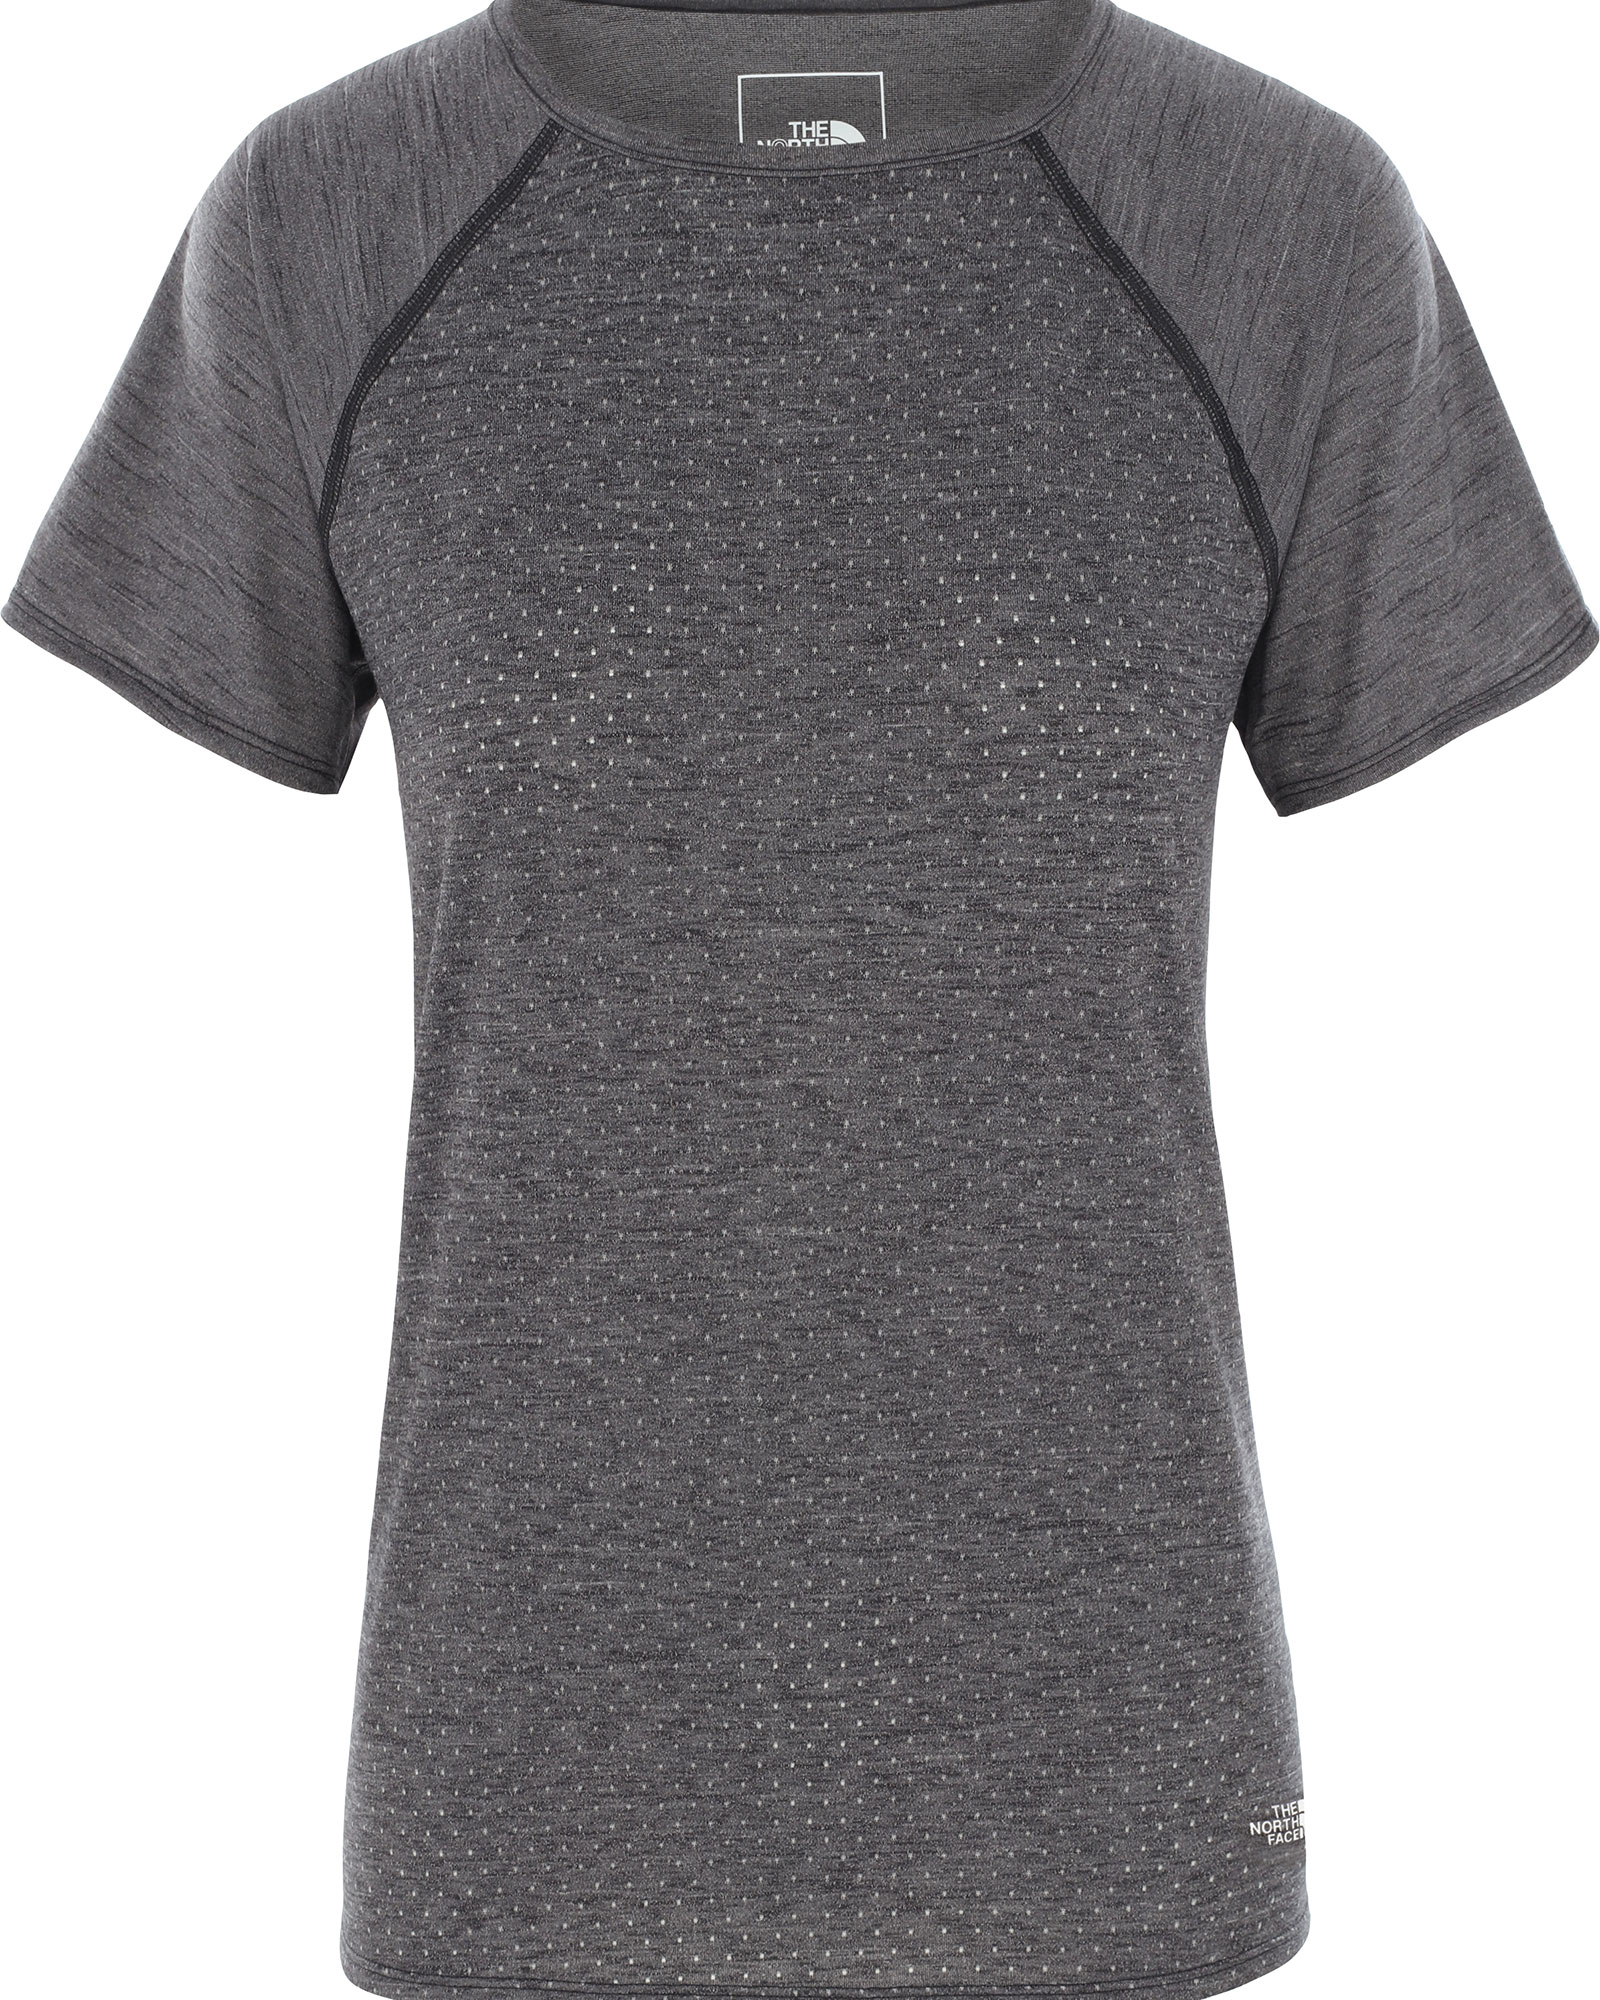 The North Face Active Trail Jacquard Women’s T Shirt - TNF Dark Grey Heather XS